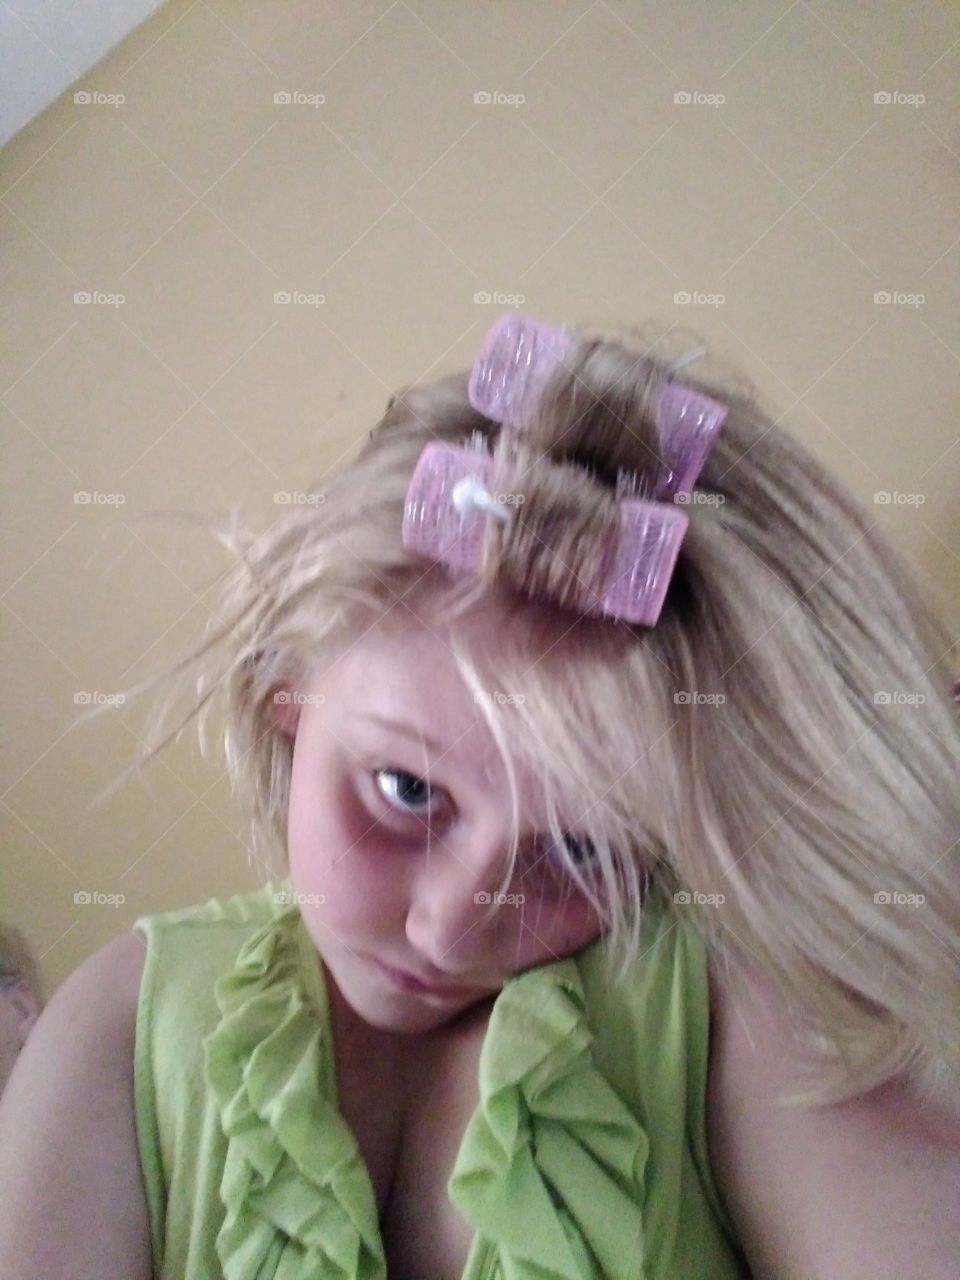 Trying curlers for the first time.